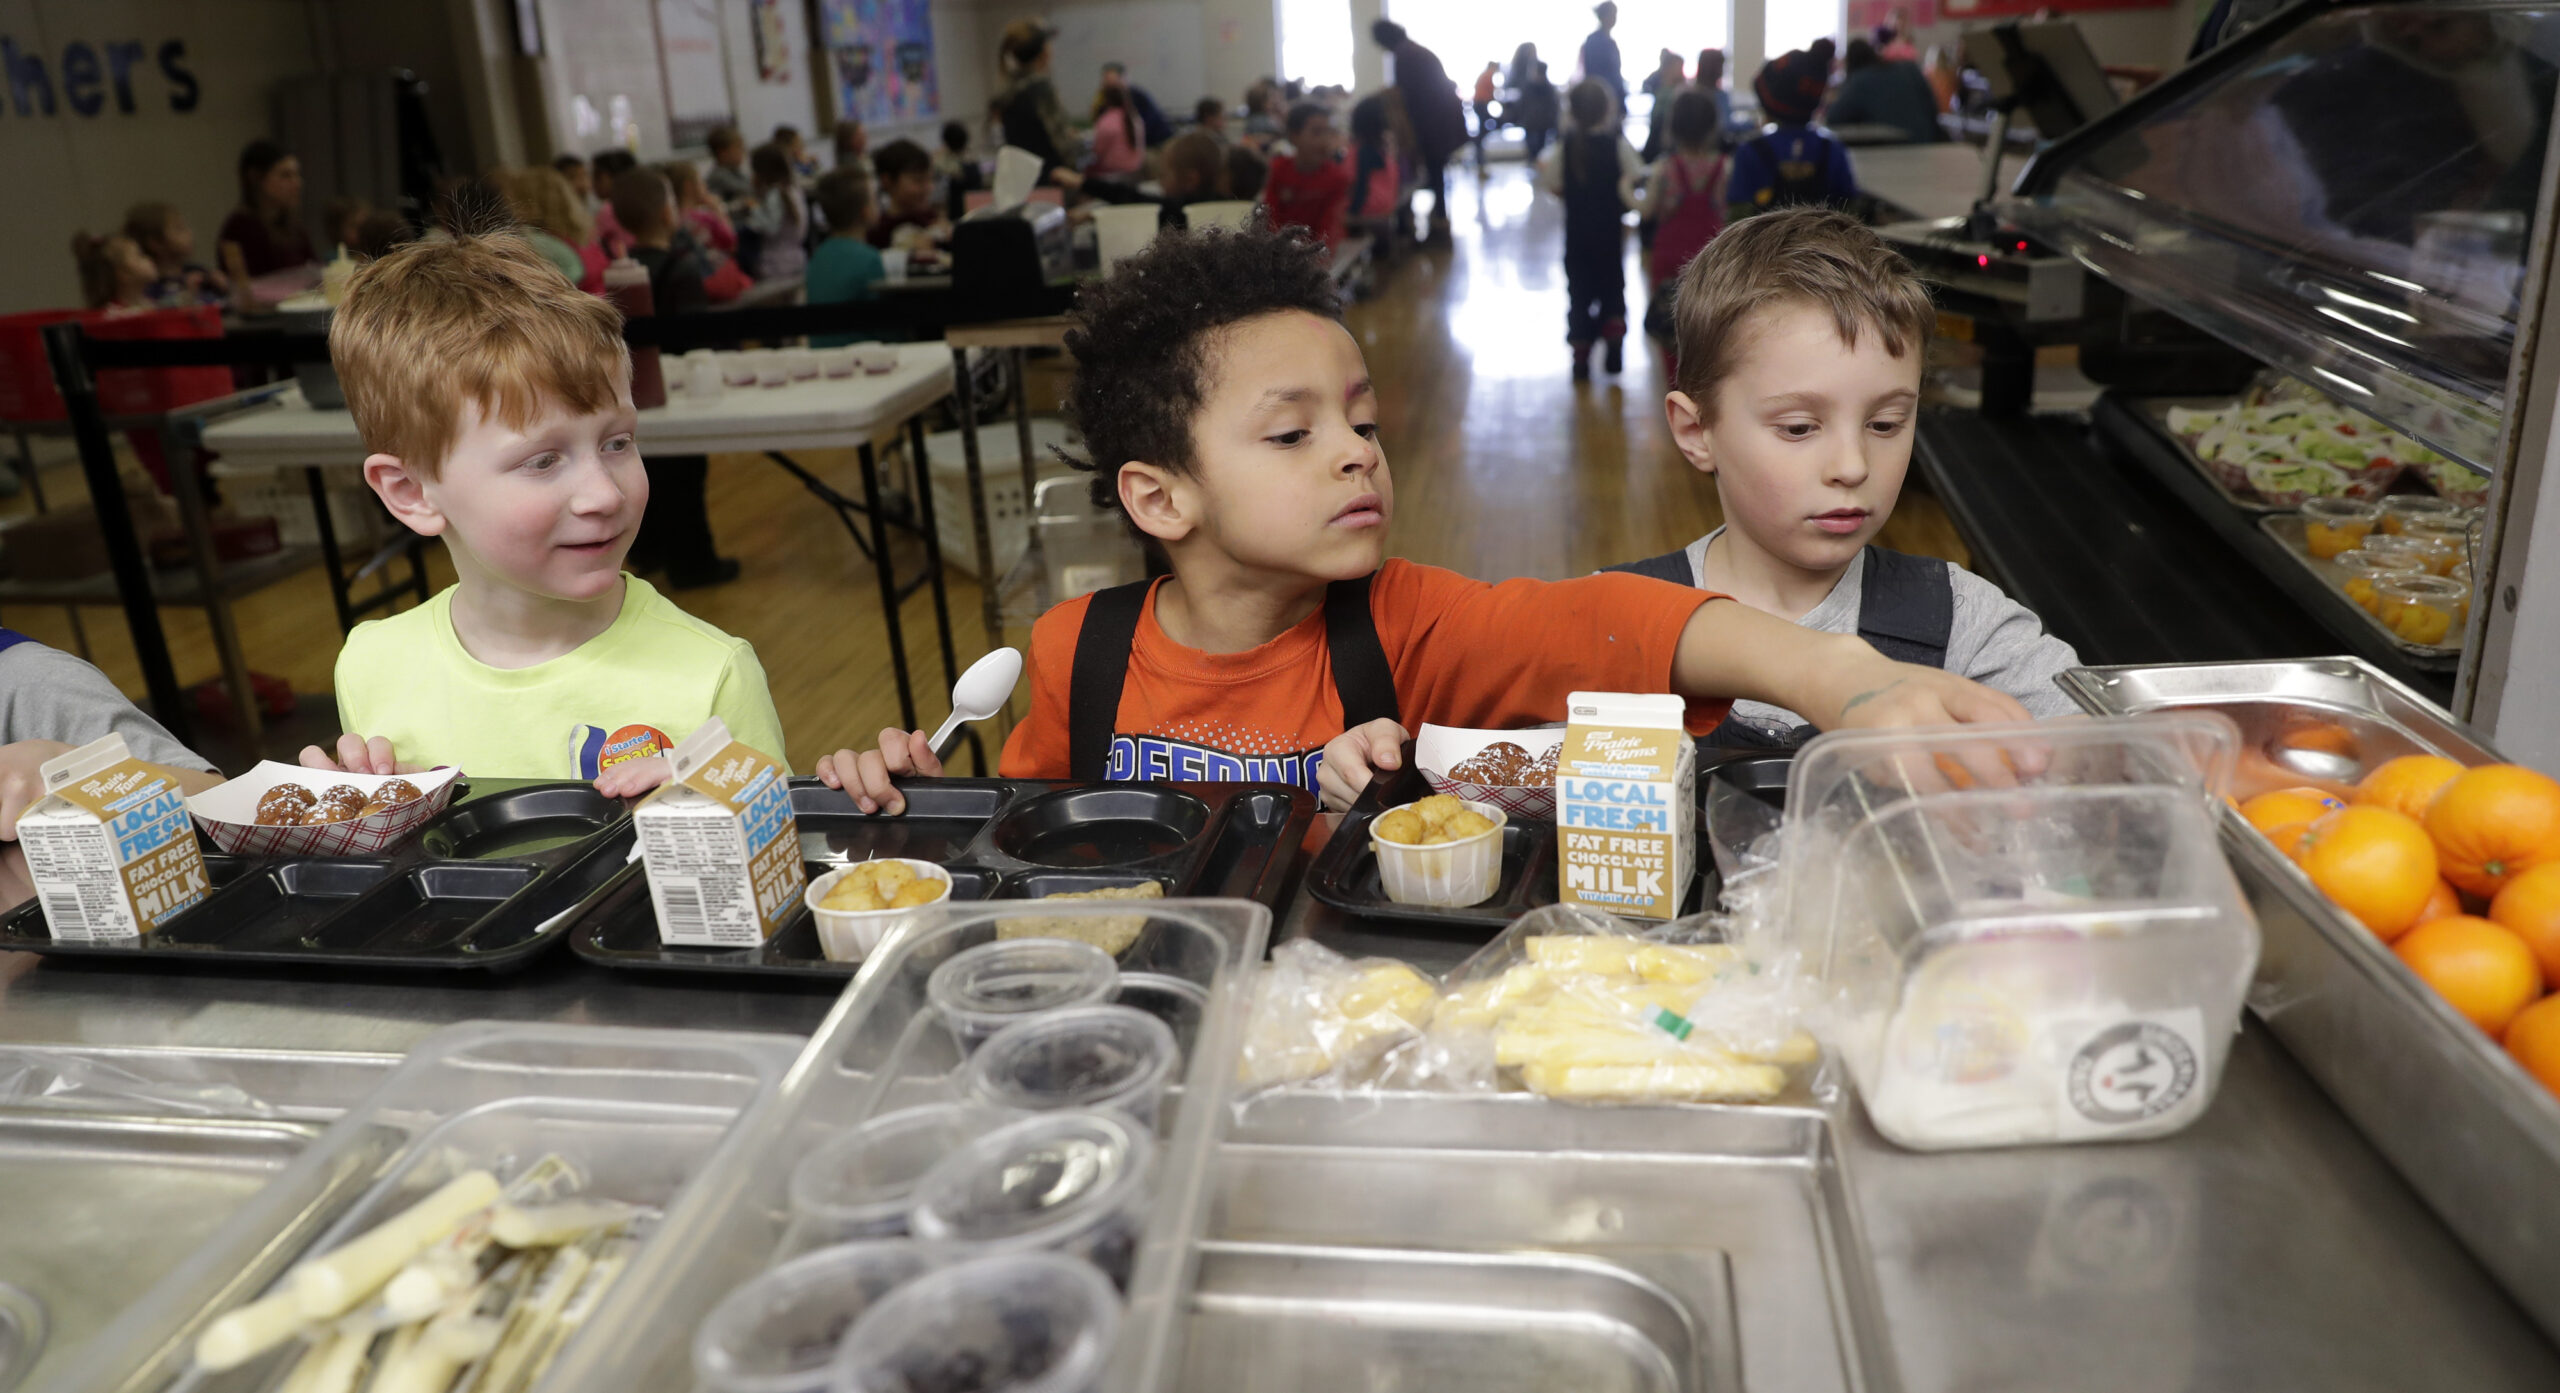 Kindergarten students at Suamico Elementary School go through the hot lunch line